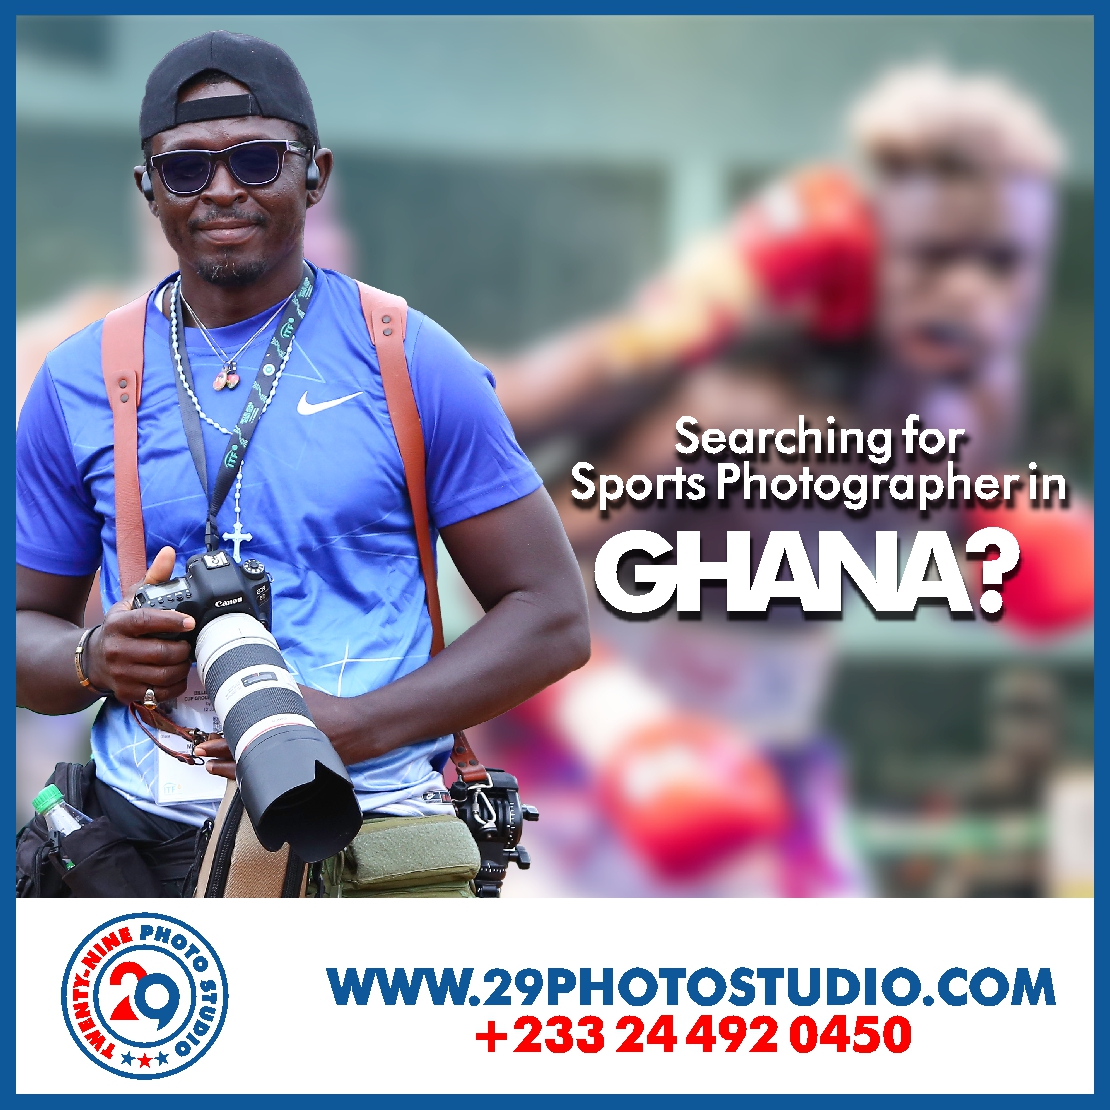 Searching for a Sports Photographer in Ghana? #sports #boxing #tennis #football #swimming #pingpong #